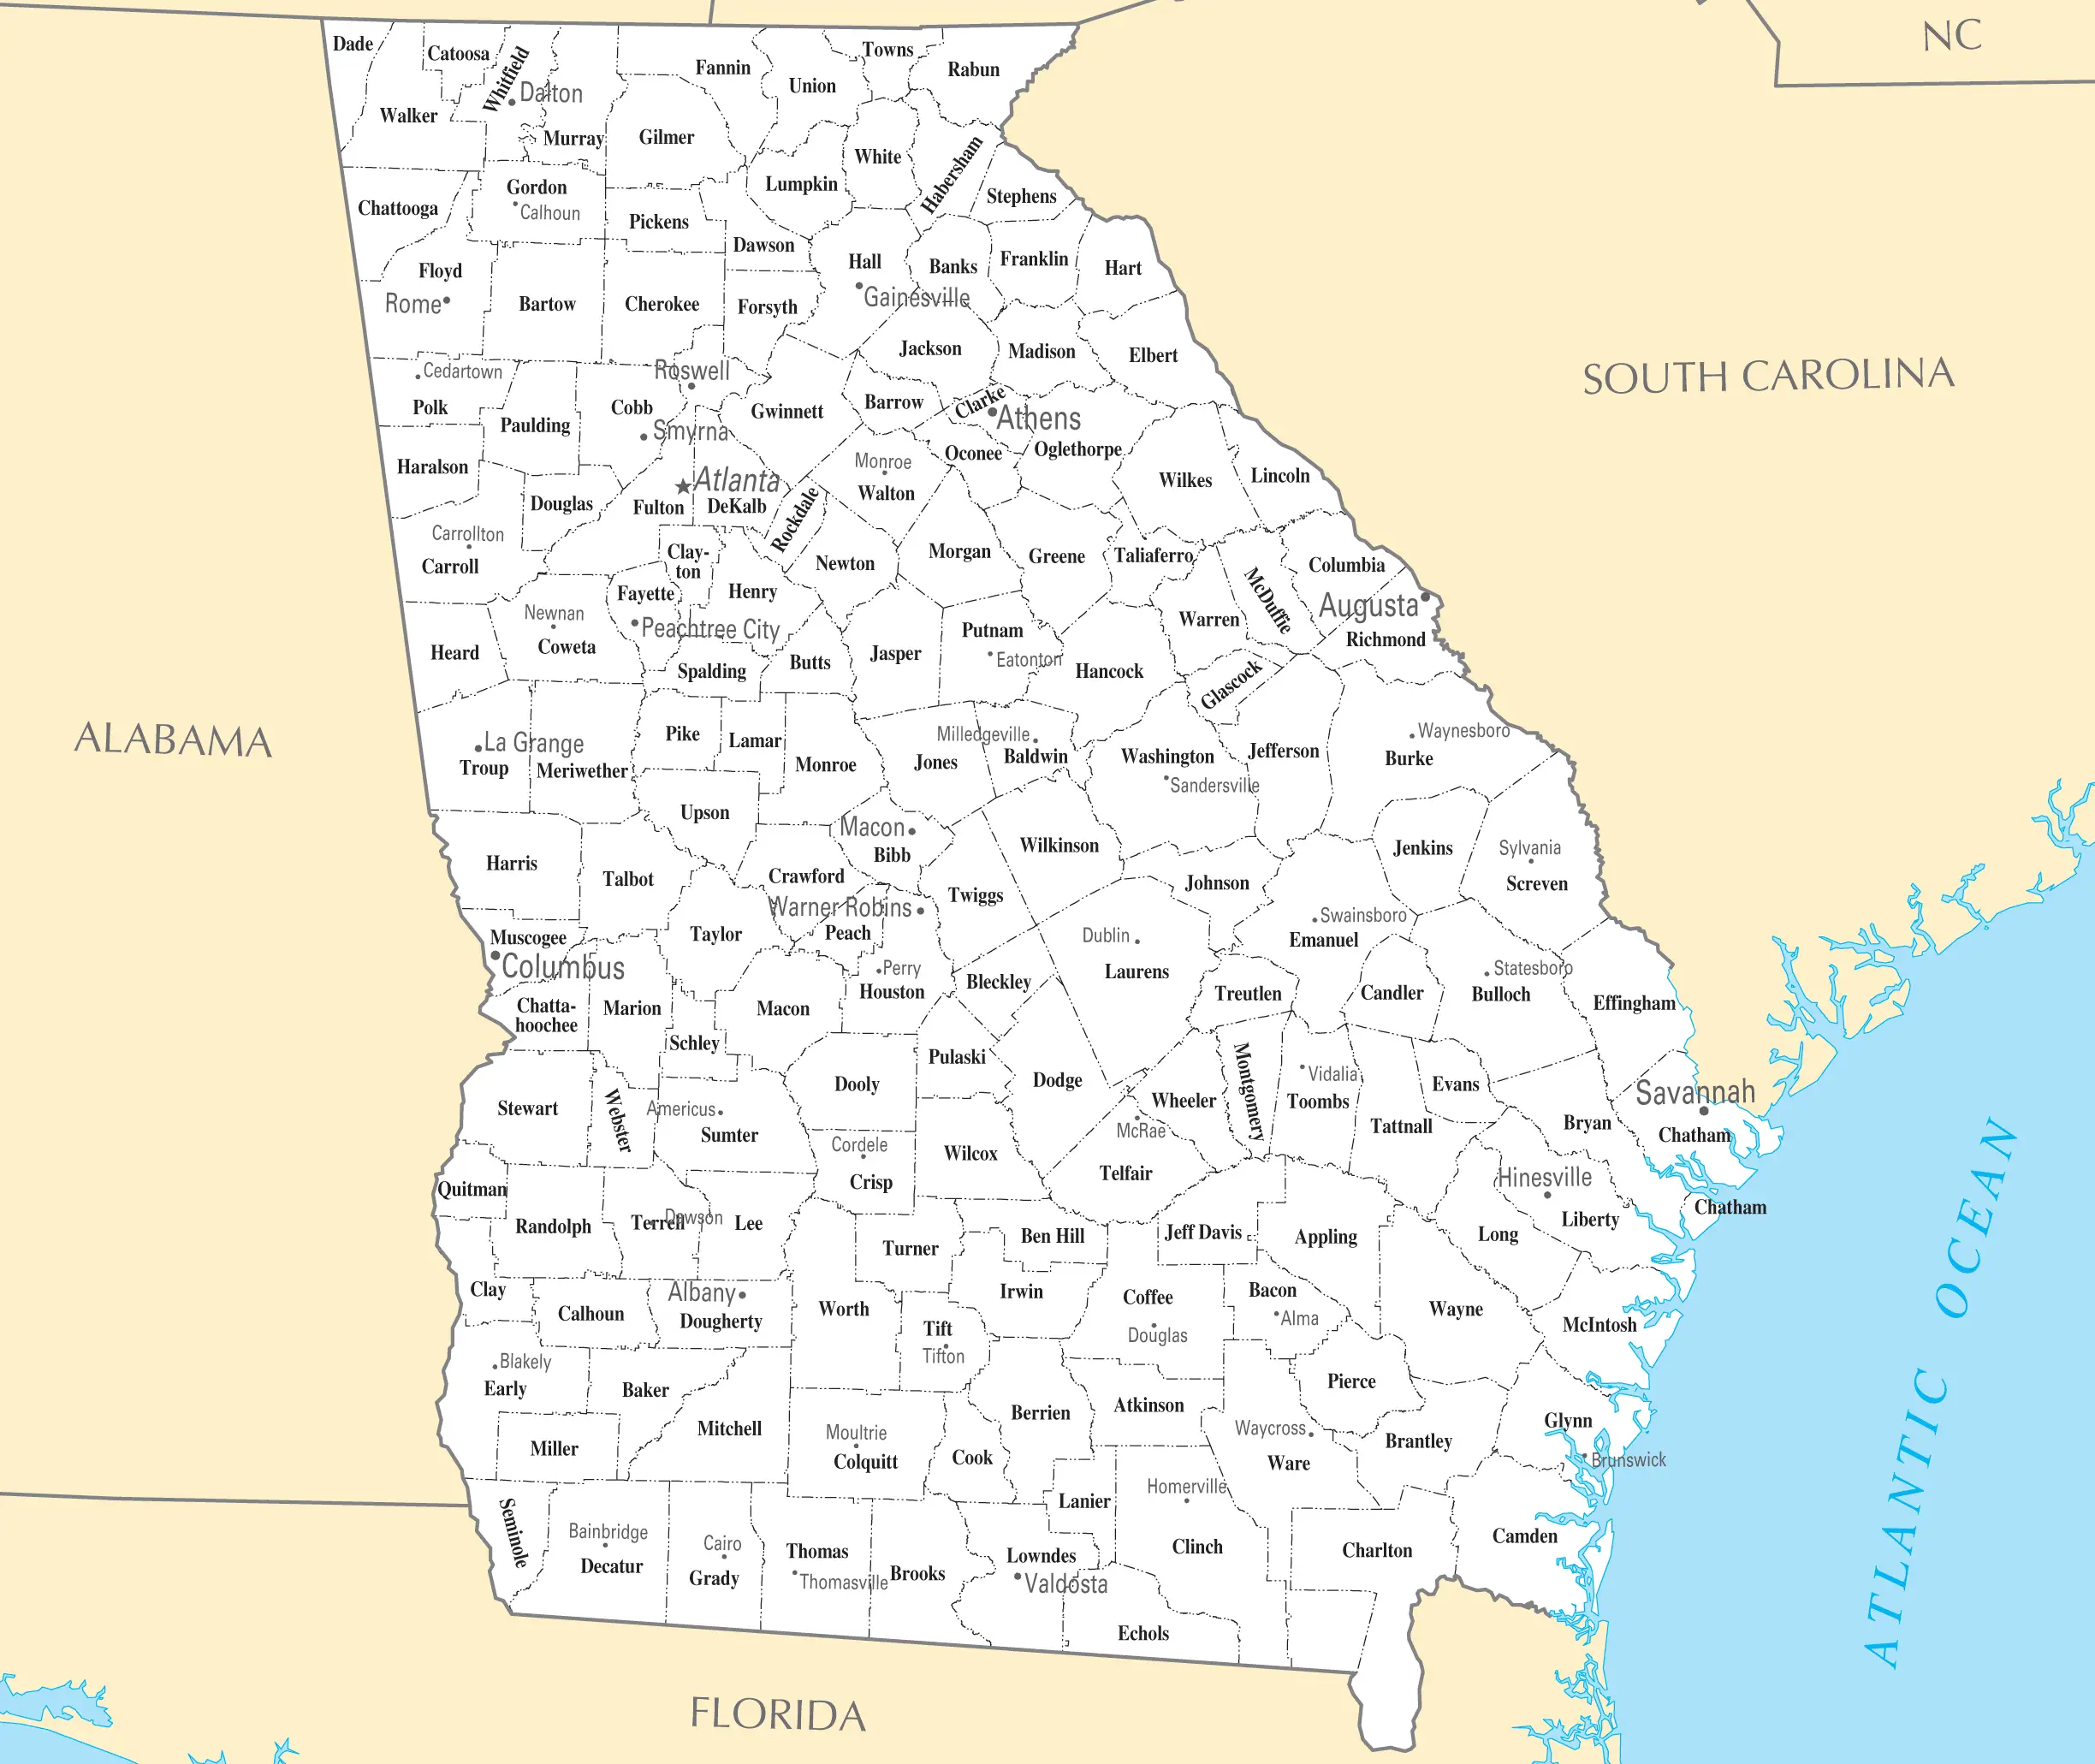 Georgia Cities And Towns - Mapsof.Net